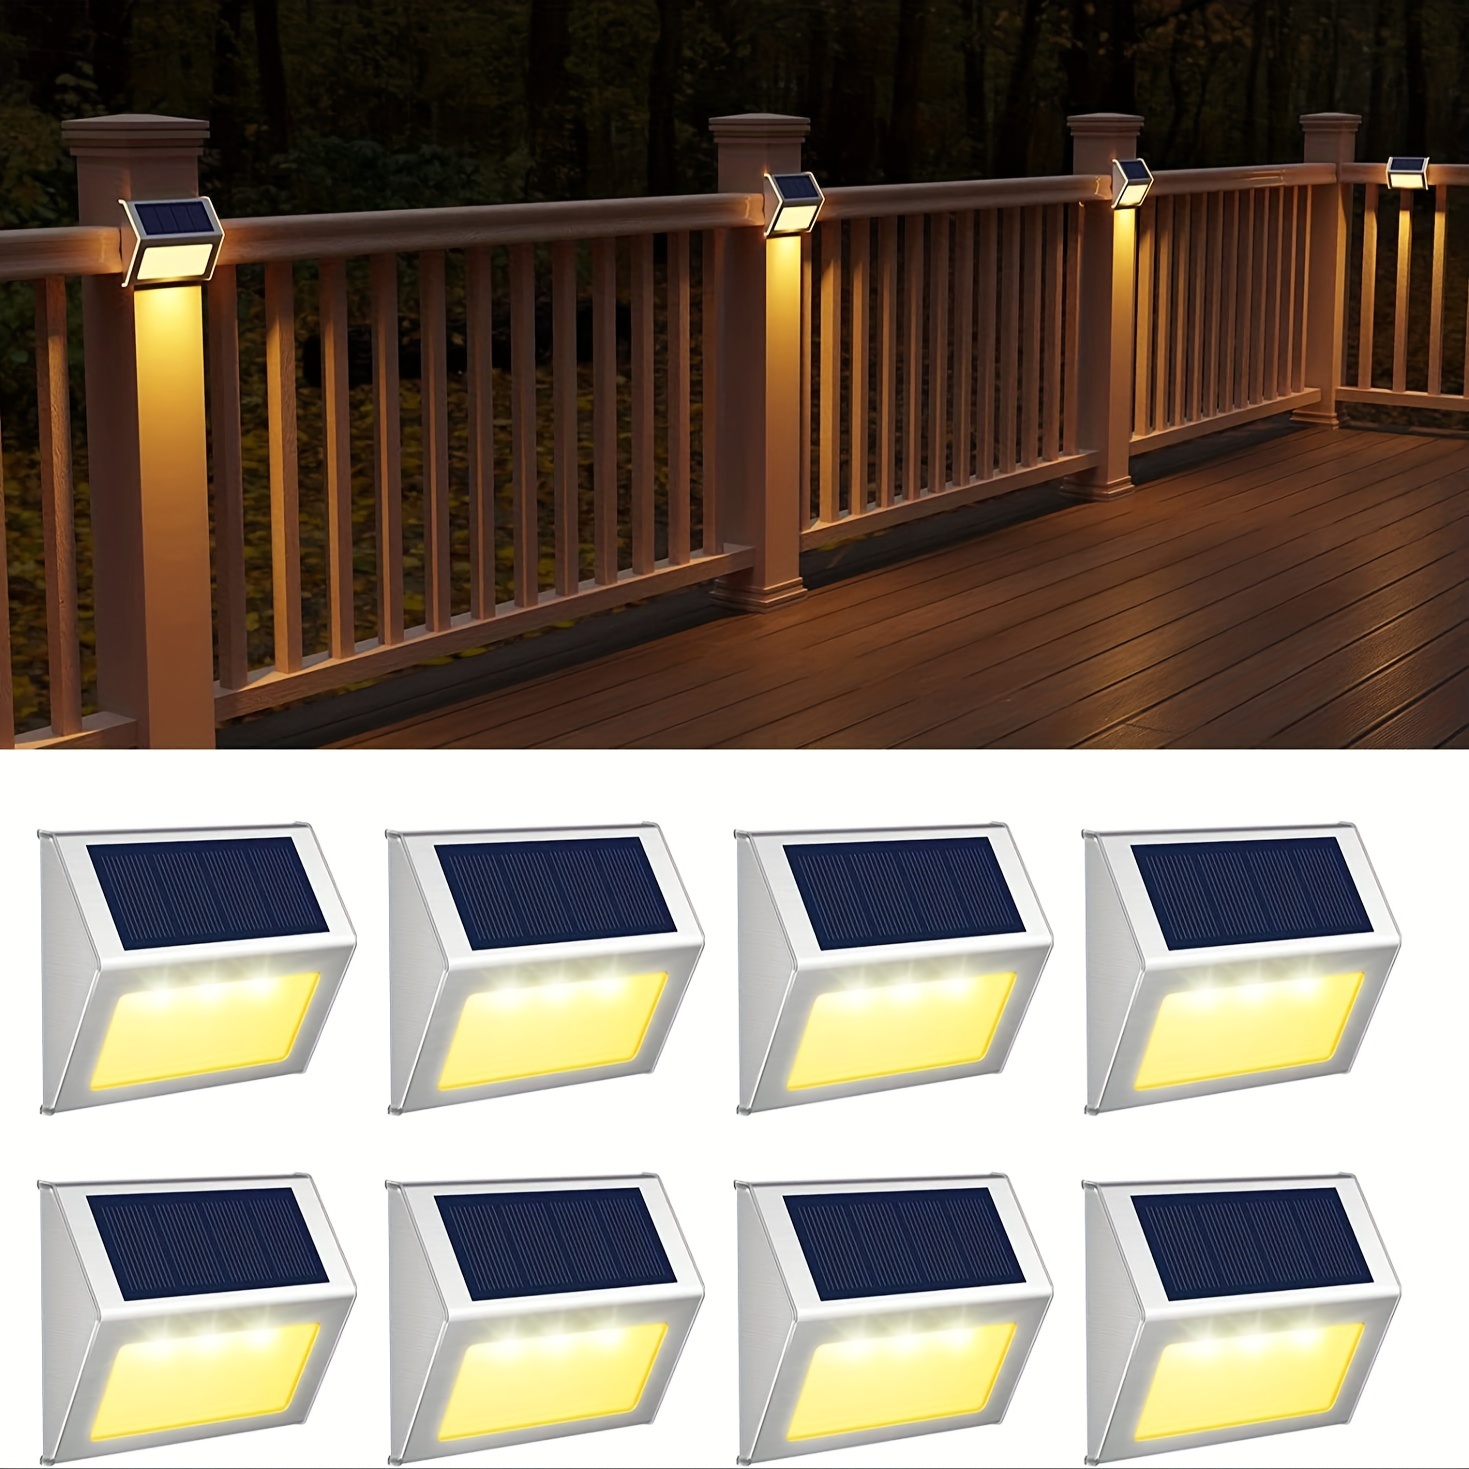 

6pcs Solar Led Deck Lights, Easy To Install, Suitable For Gardens, Patios, And Roads